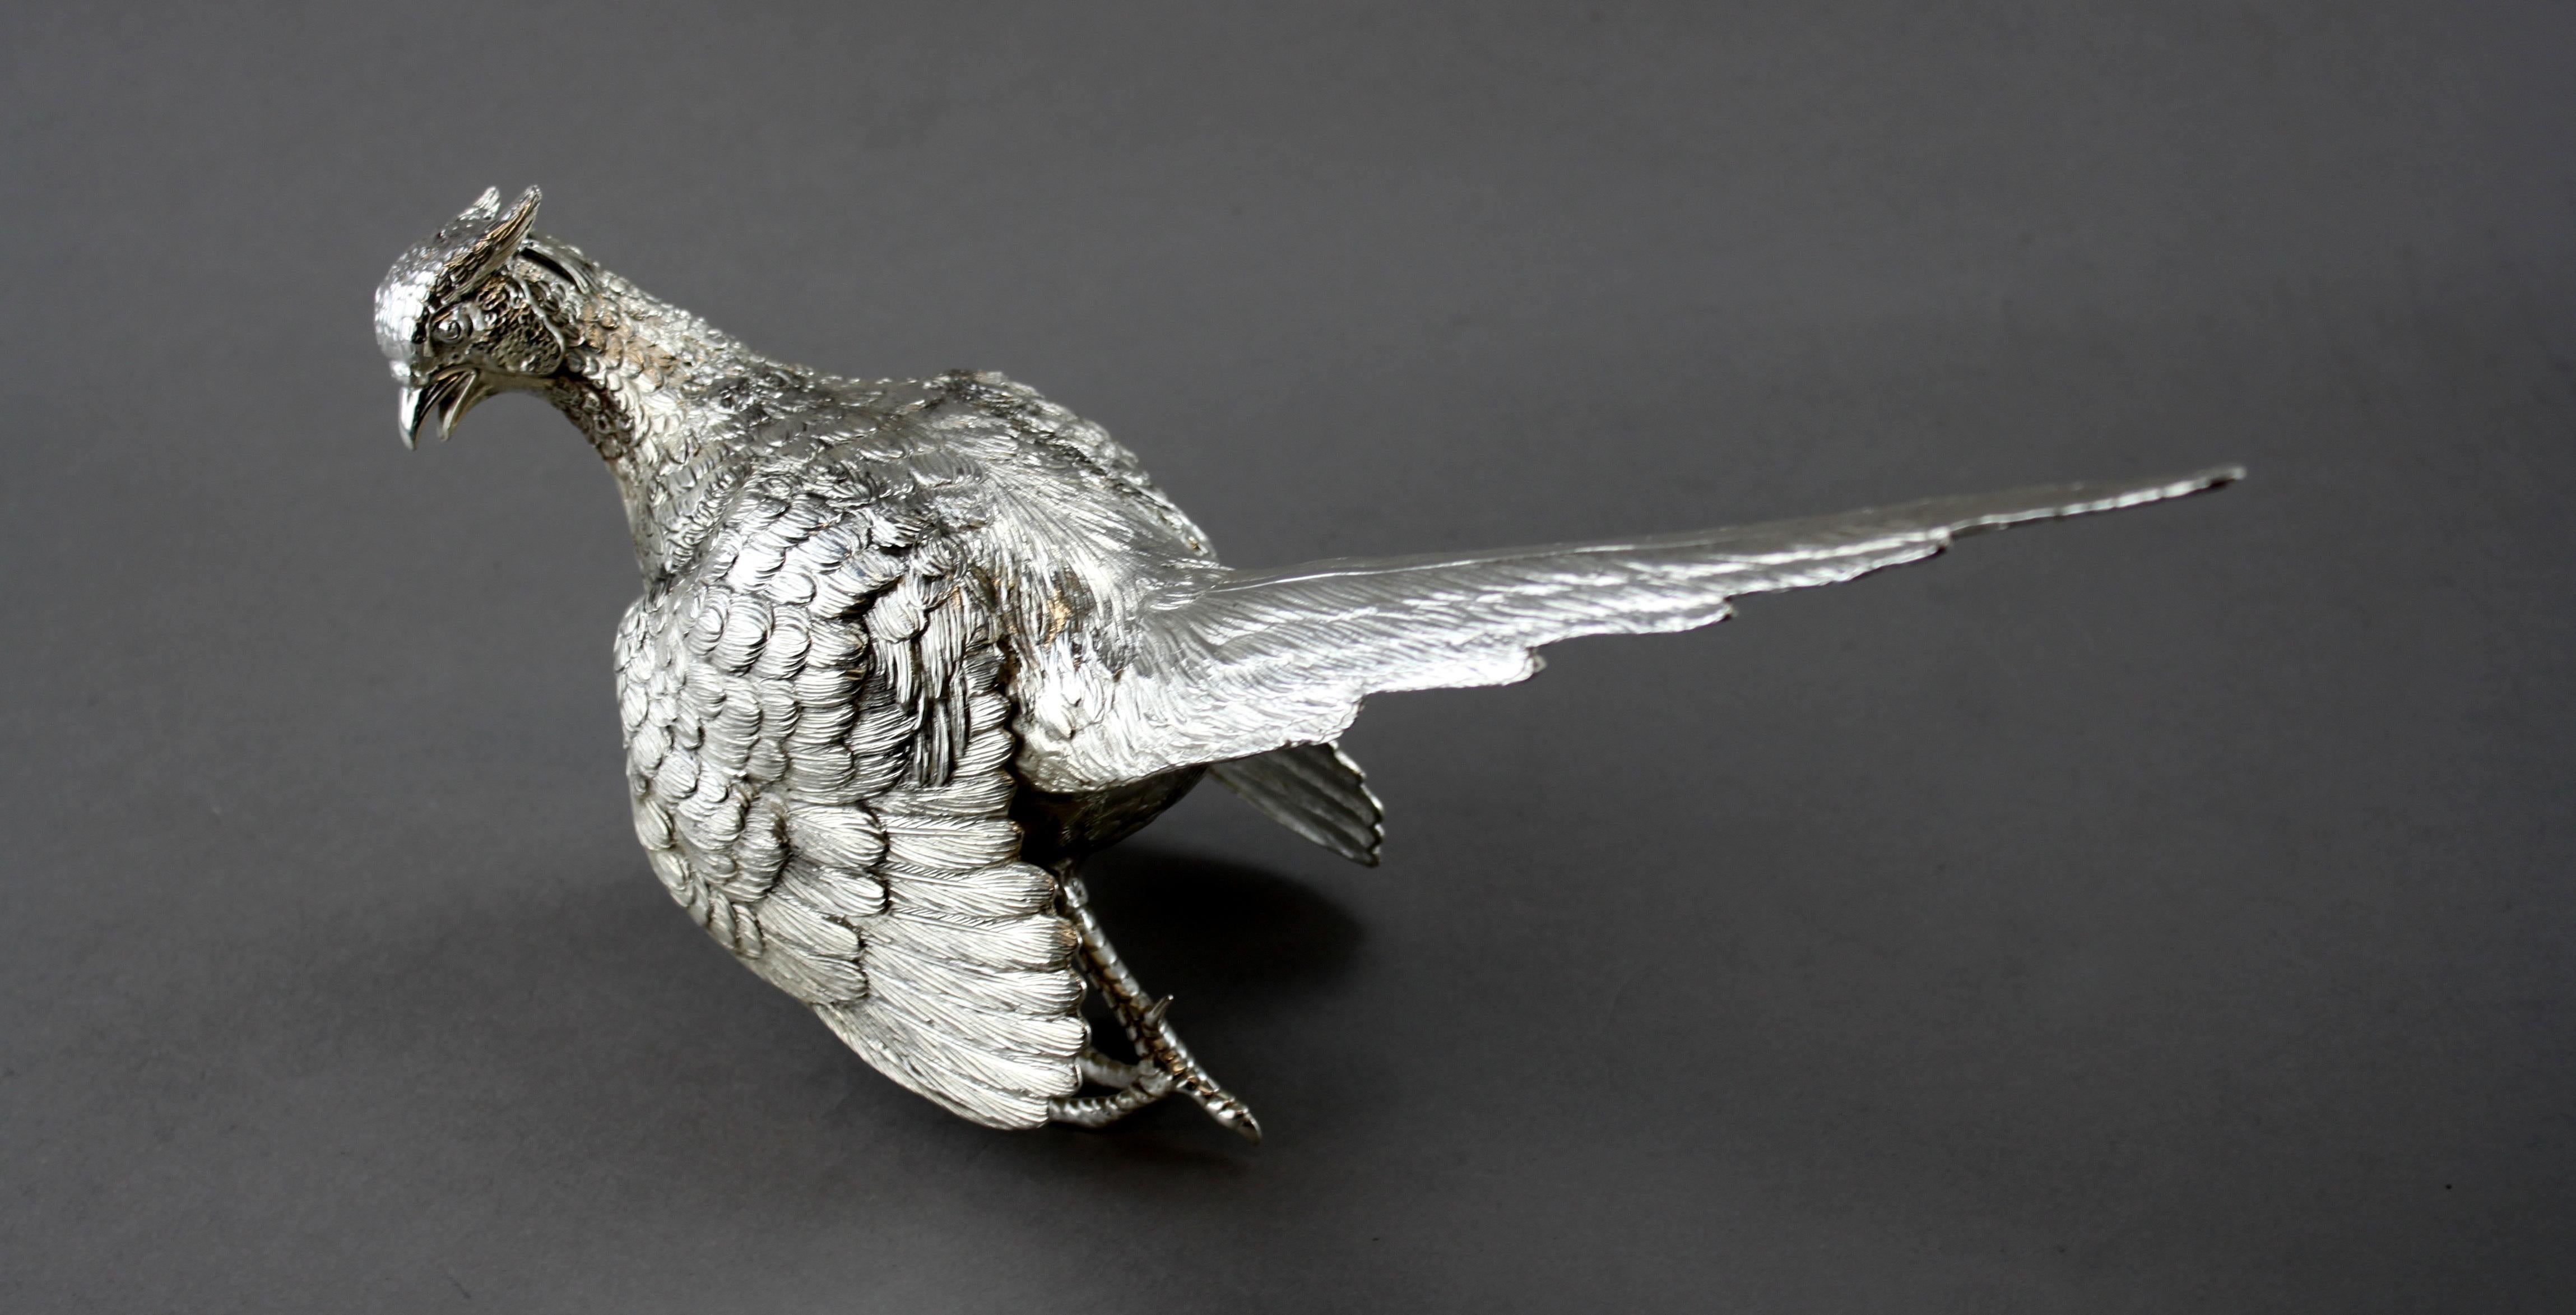 Sterling silver bird figurine
Maker : C J Vander LTD
Made in London 2018
Fully hallmarked.

Dimensions: 
Length 29.5 cm
Width 10 cm
Height 15.7 cm
Weight 1025 grams.

Condition: Bird figurine is pre-owned, general used, no damage,